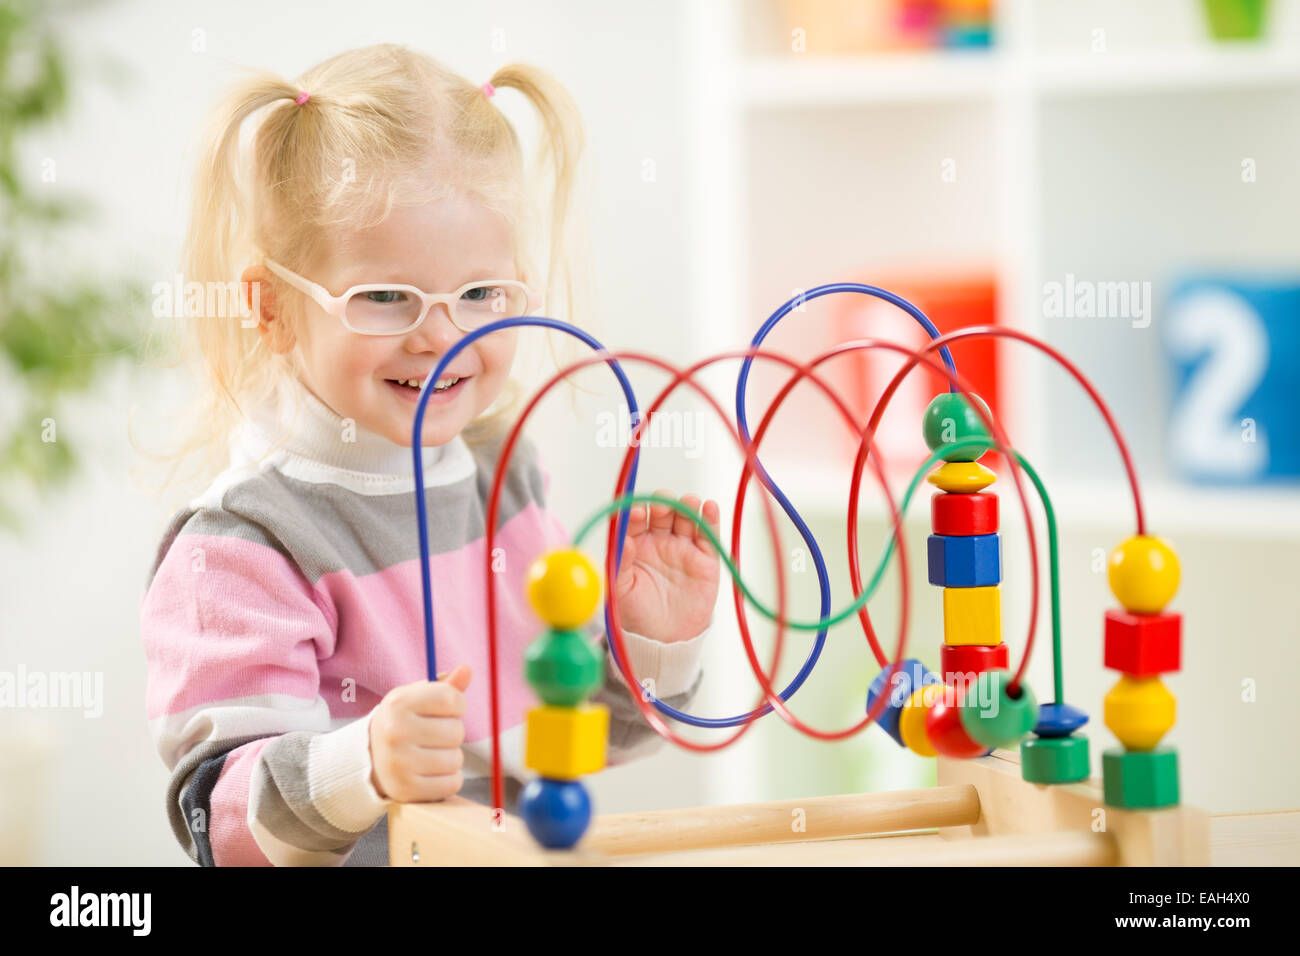 Kid in eyeglases playing colorful toy in home interior Stock Photo